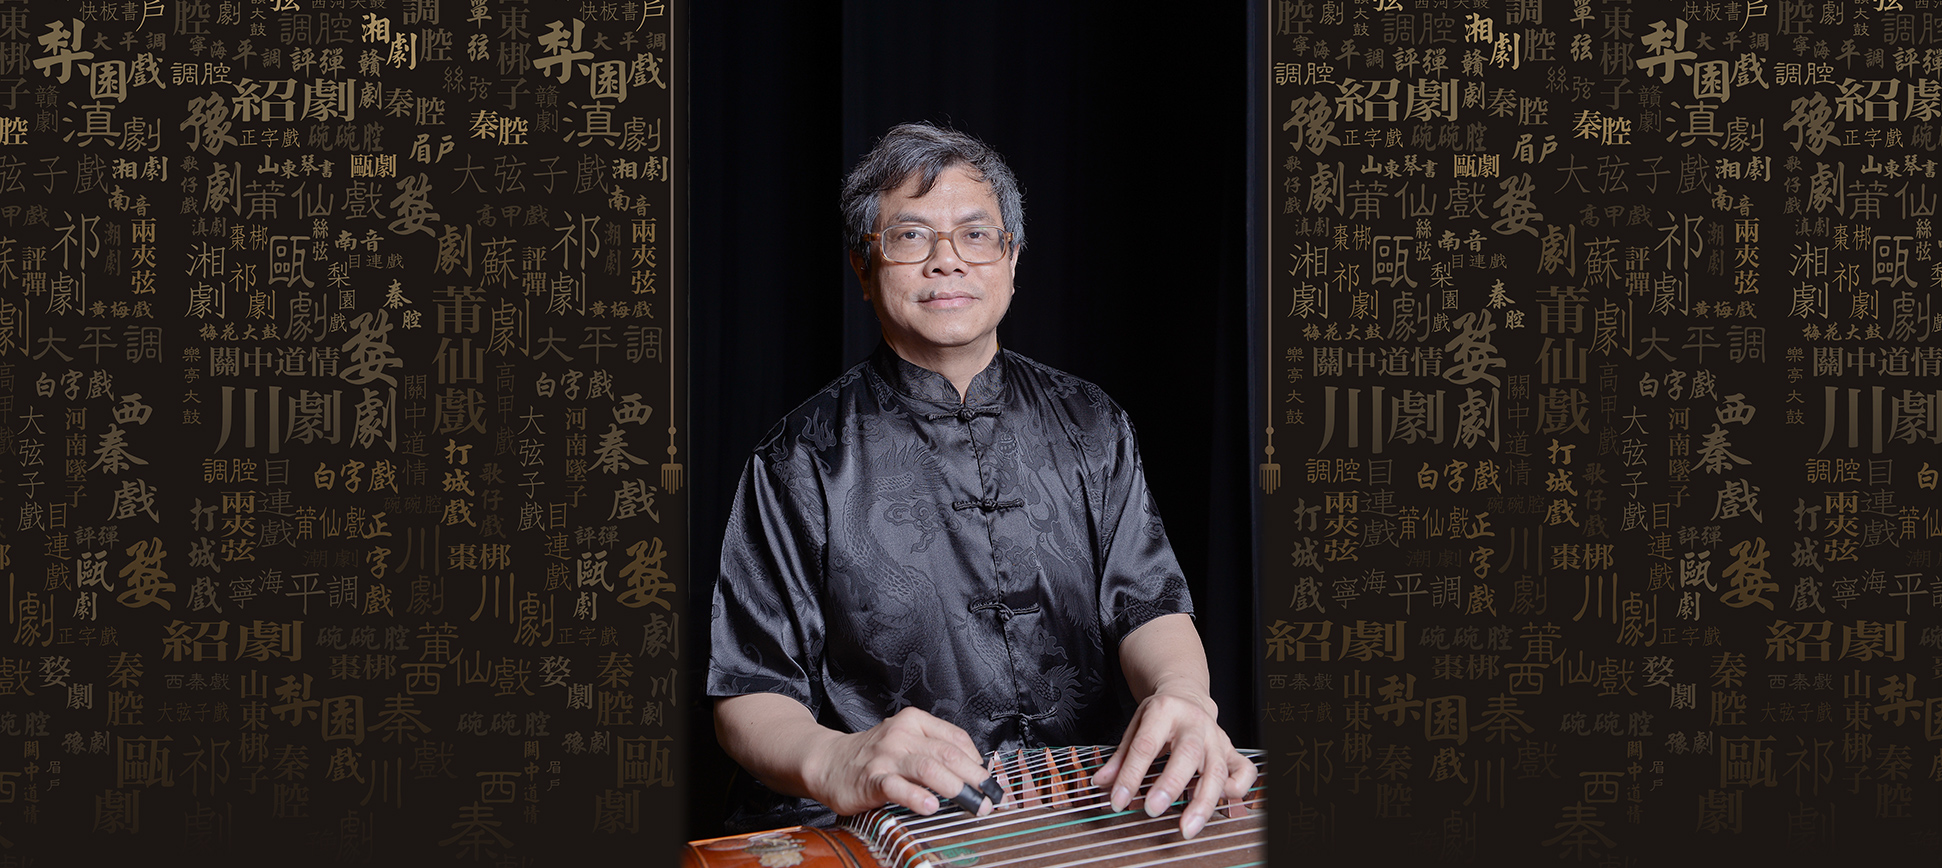 Guangdong Quadrangle – Four Folk Music Types in Concert